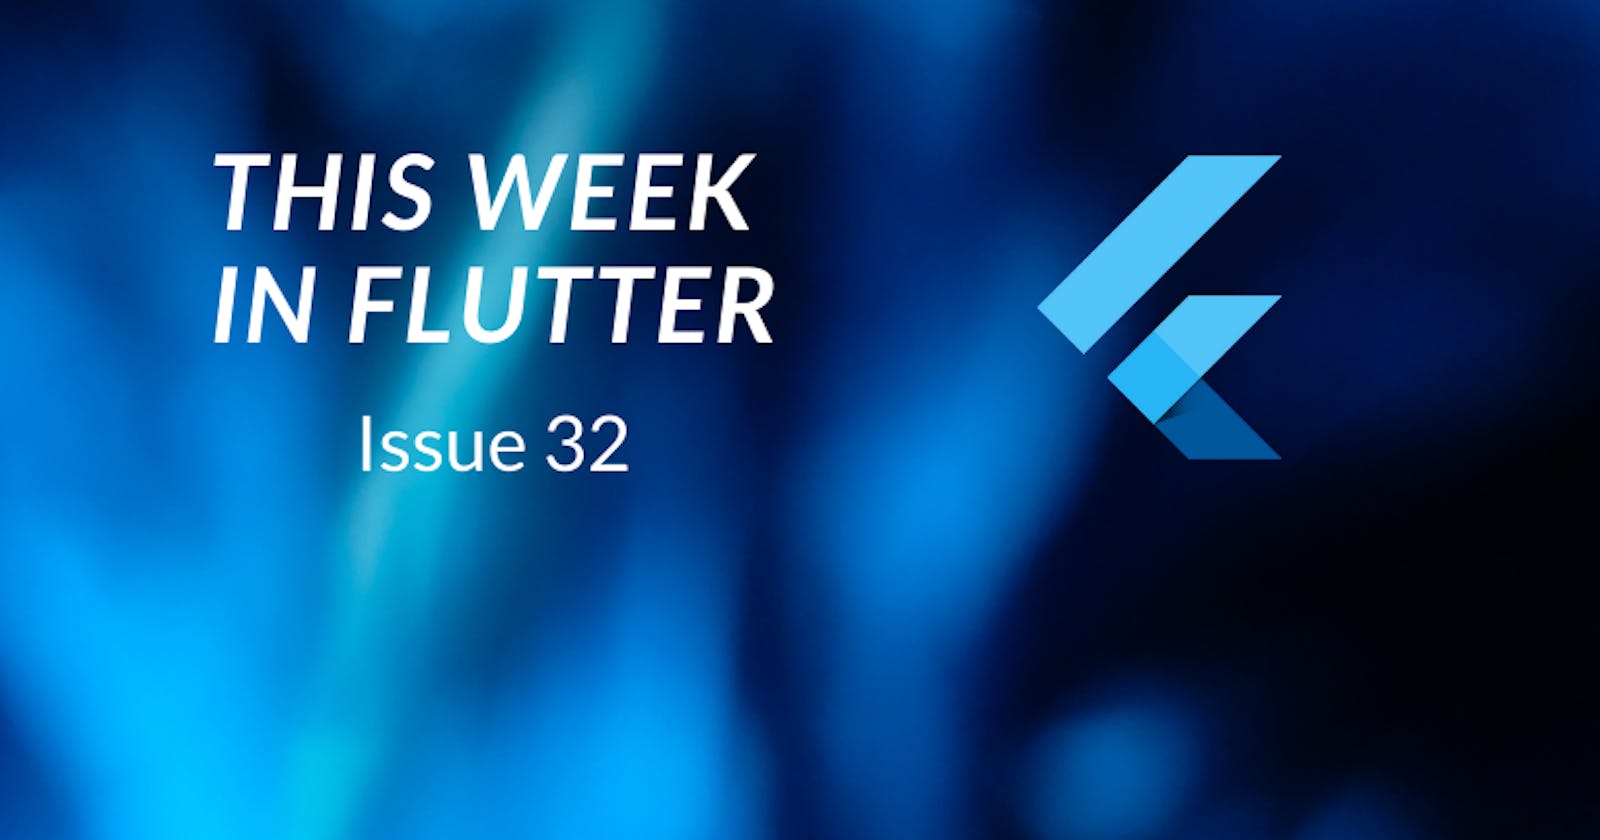 This week in Flutter #32